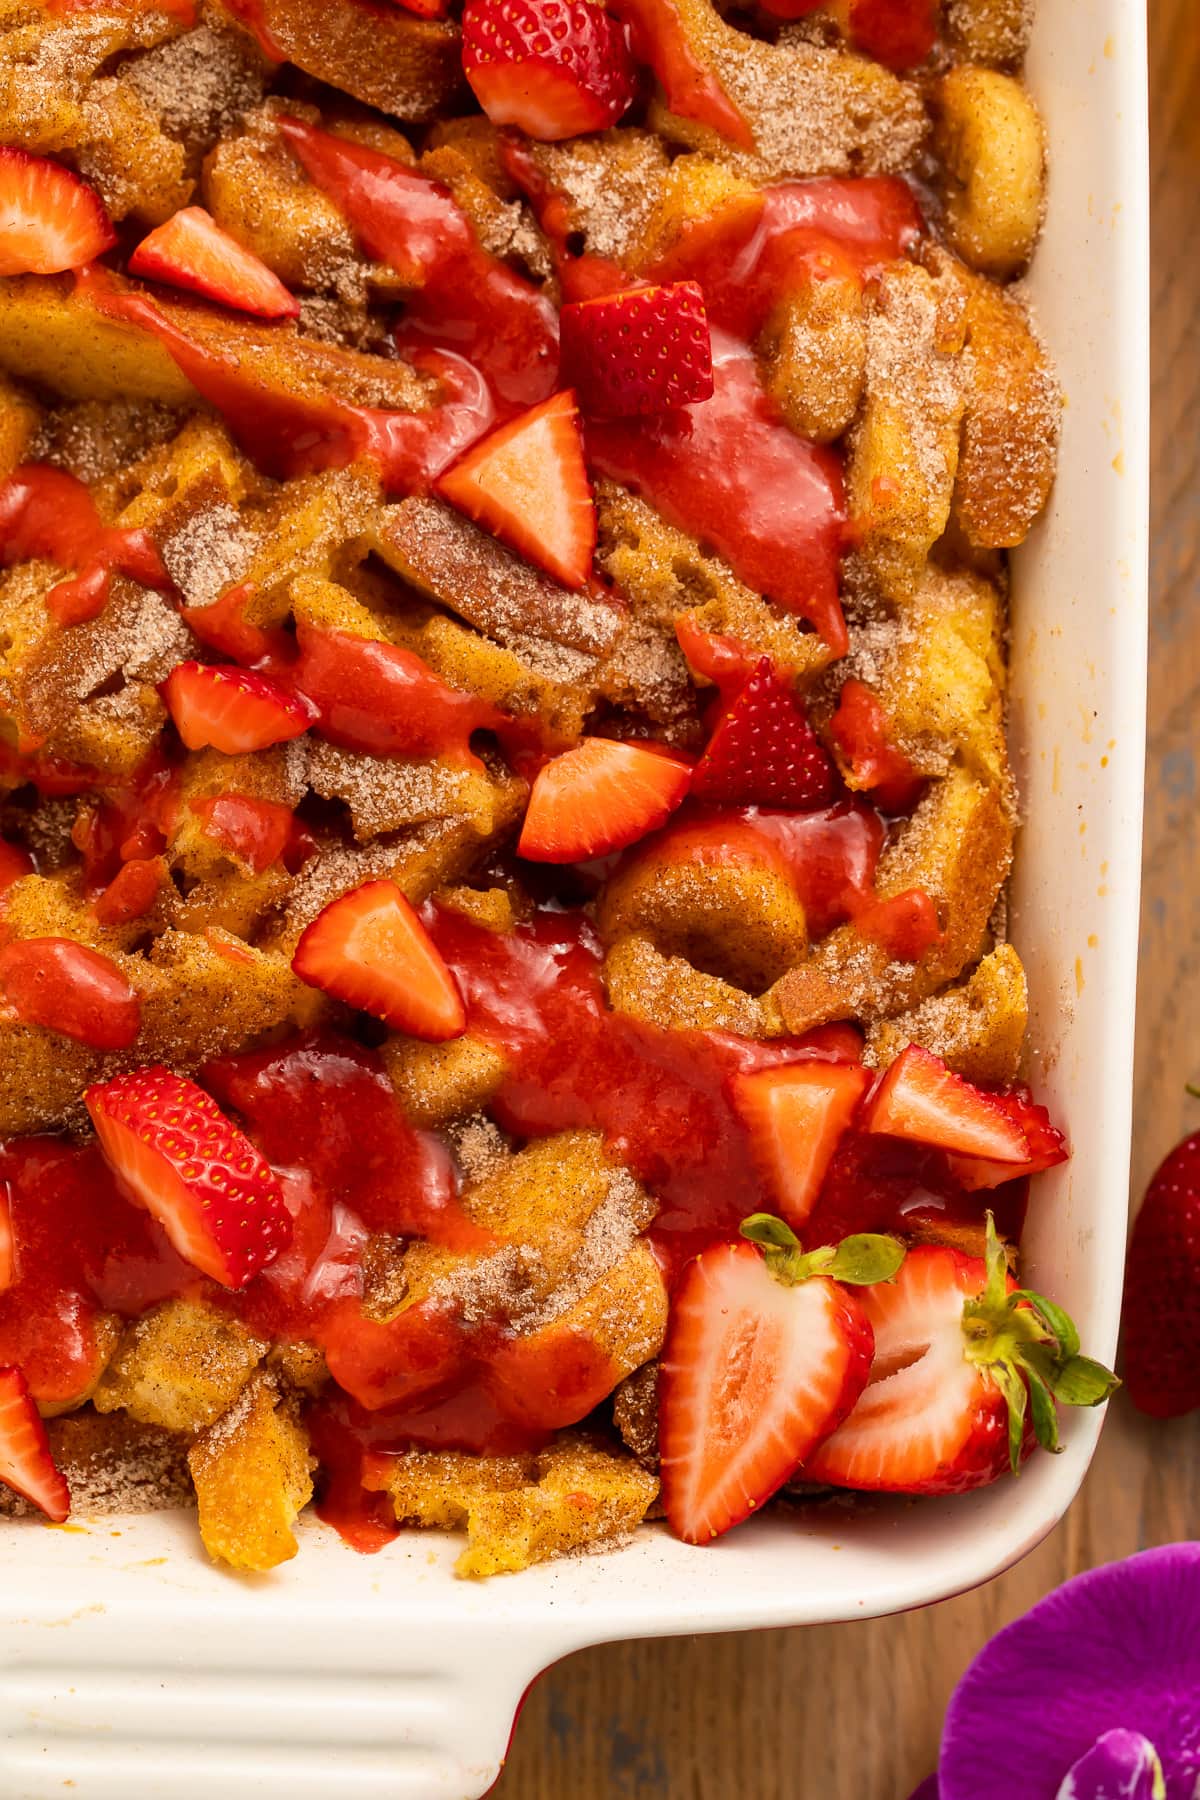 A casserole dish, on a table, filled with banana stuffed french toast casserole topped with strawberries.